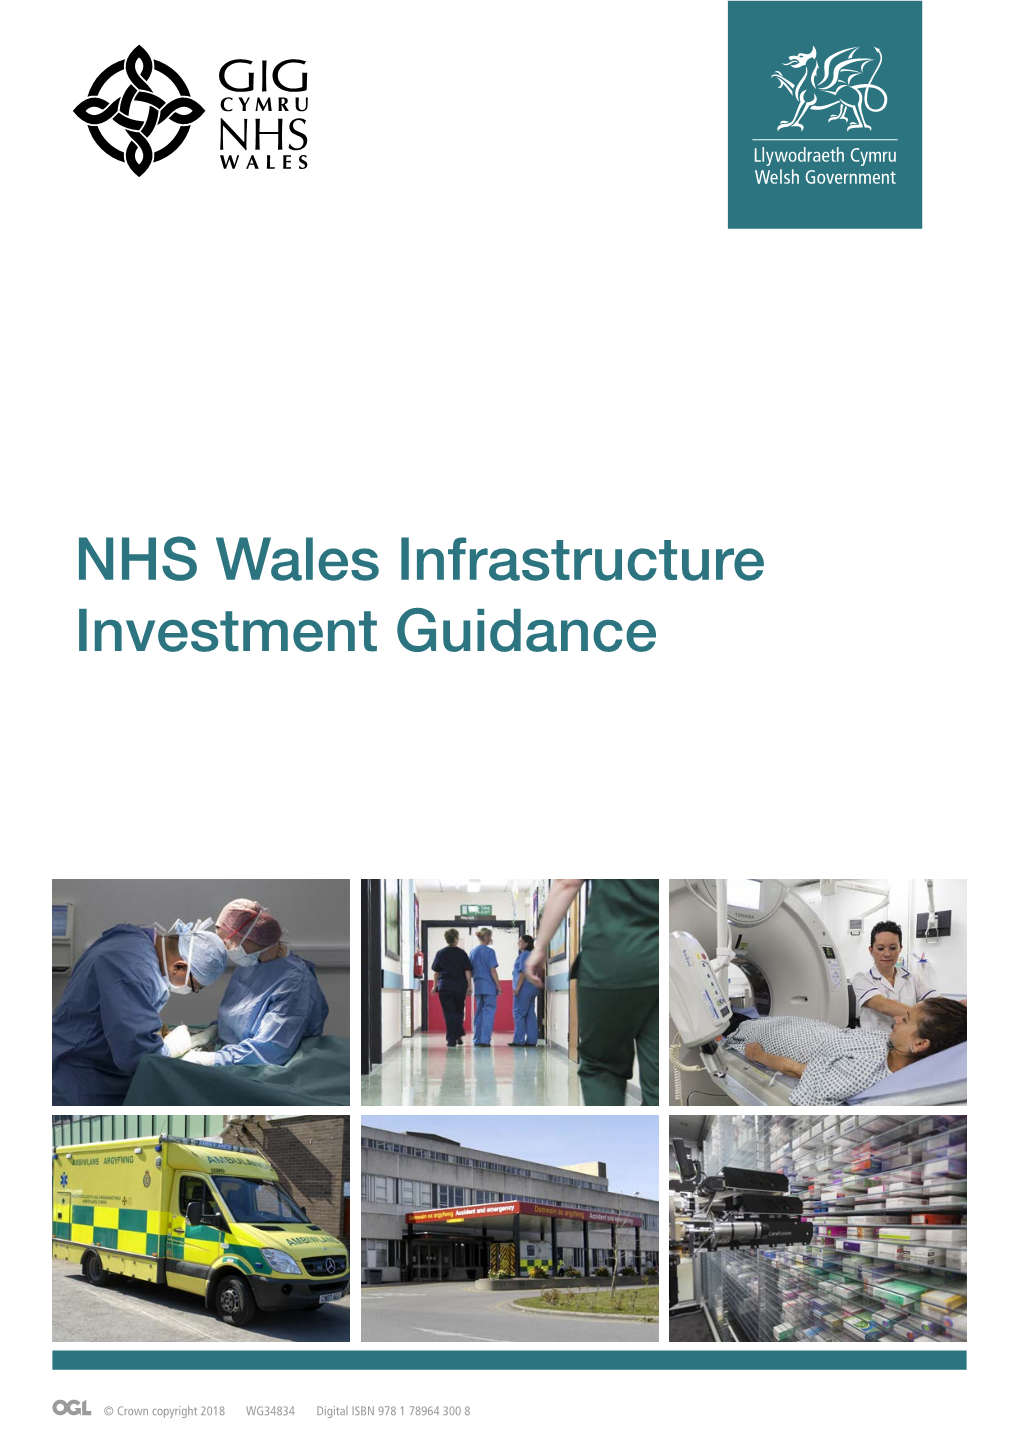 NHS Wales Infrastructure Investment Guidance